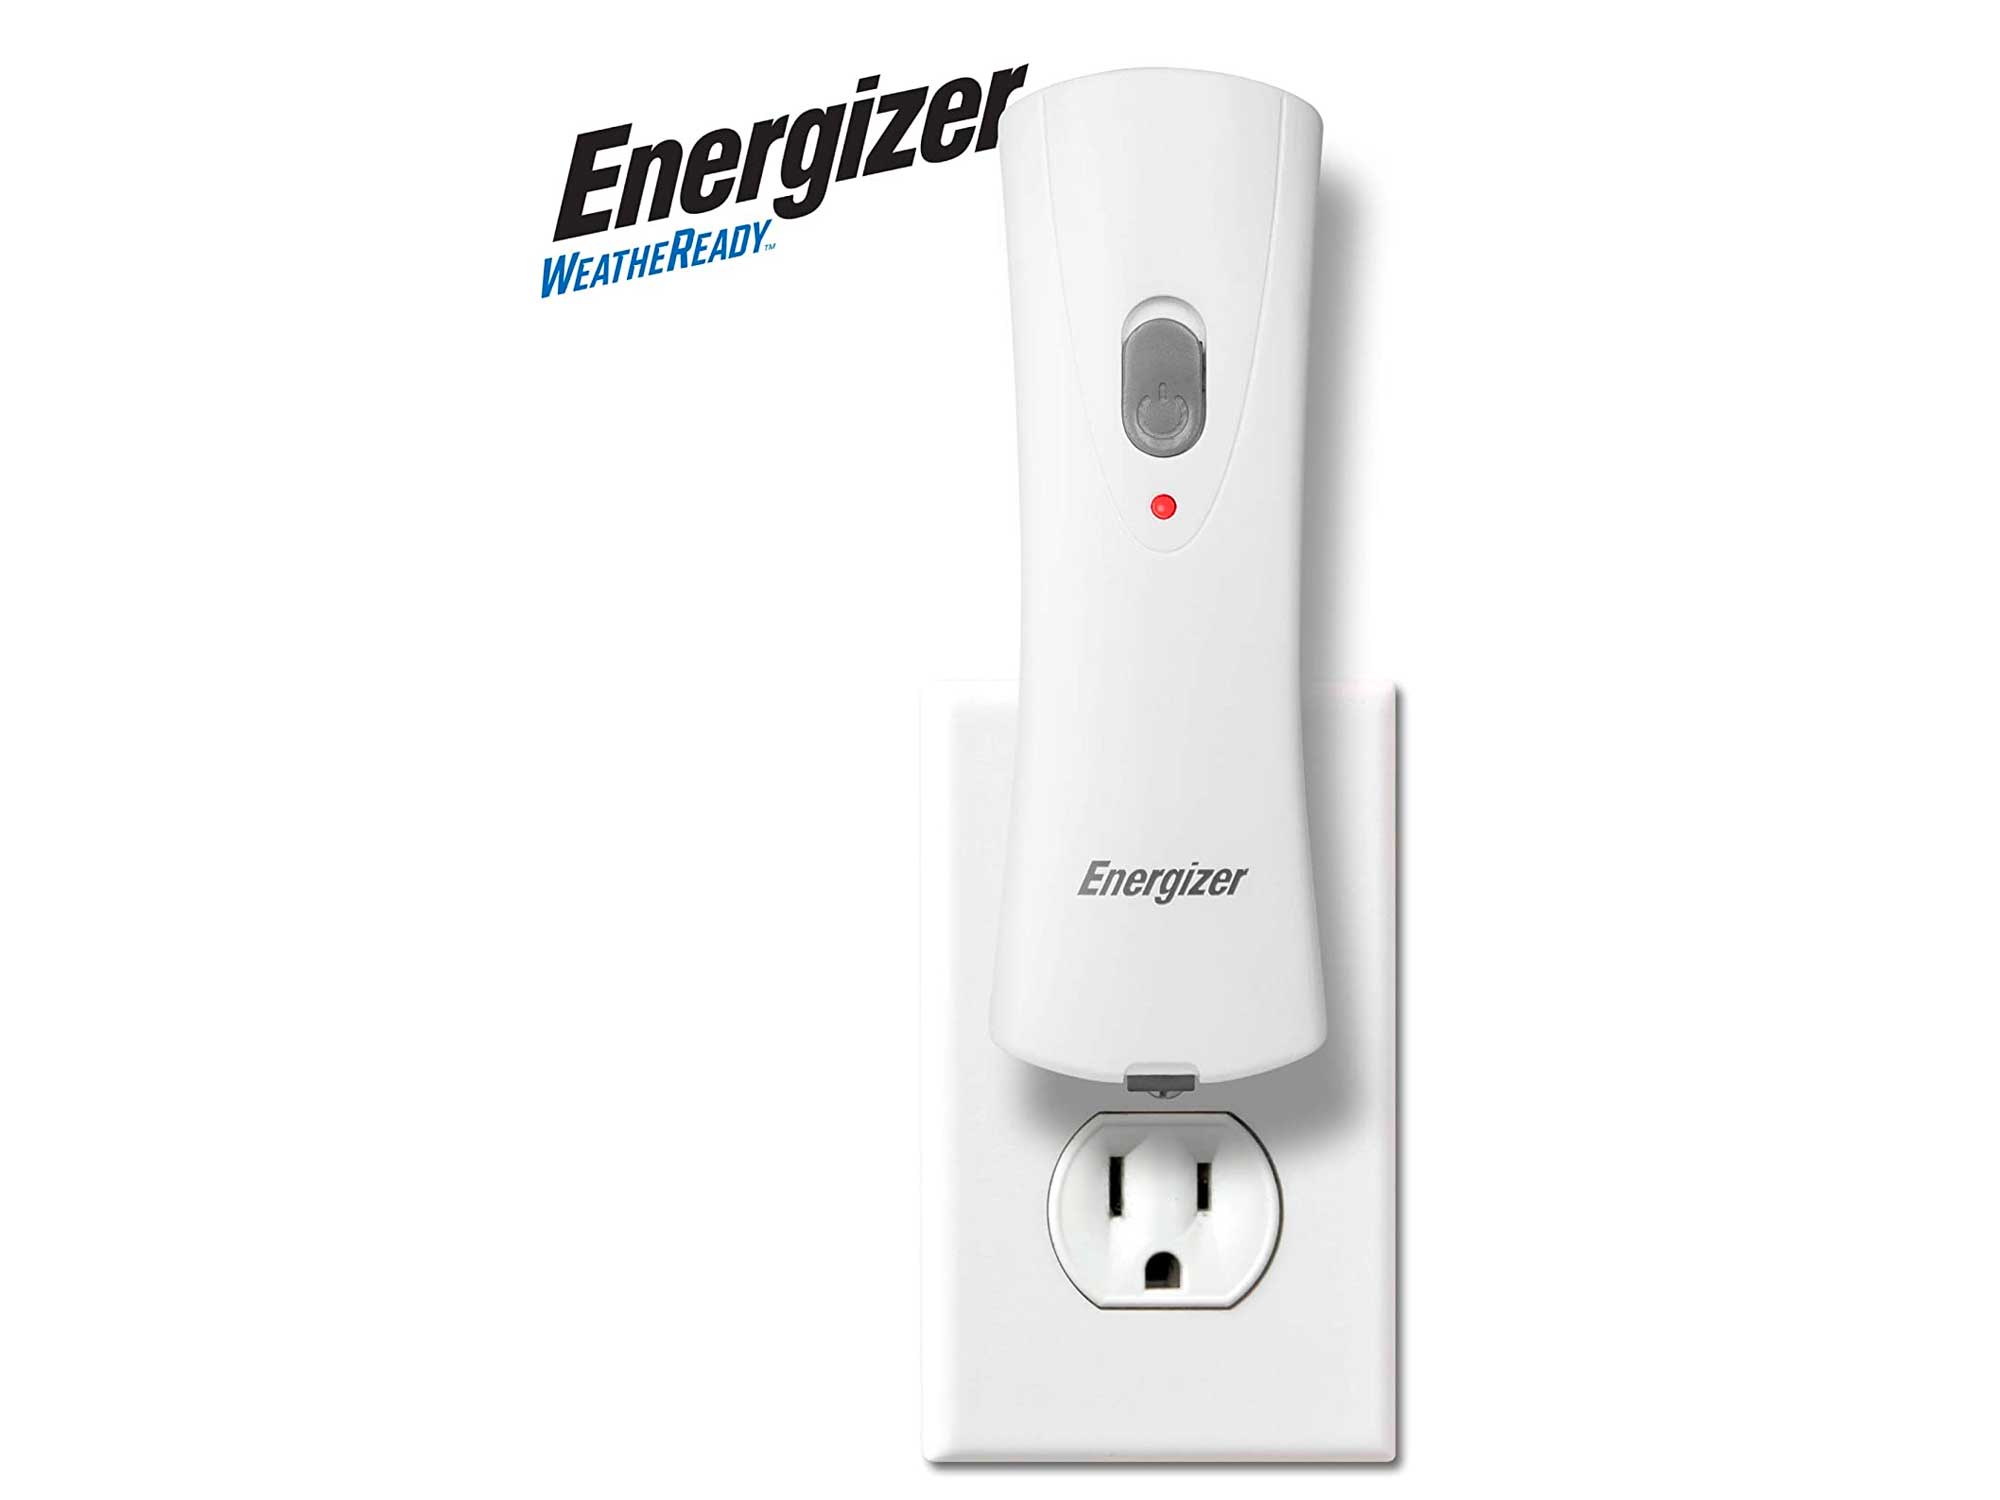 ENERGIZER Compact Rechargeable Emergency LED Flashlight, Plug-in Power Outage Light, Portable Rechargeable Power Failure Flashlights, Great For Hurricane Supplies, Survival Kits, Emergencies